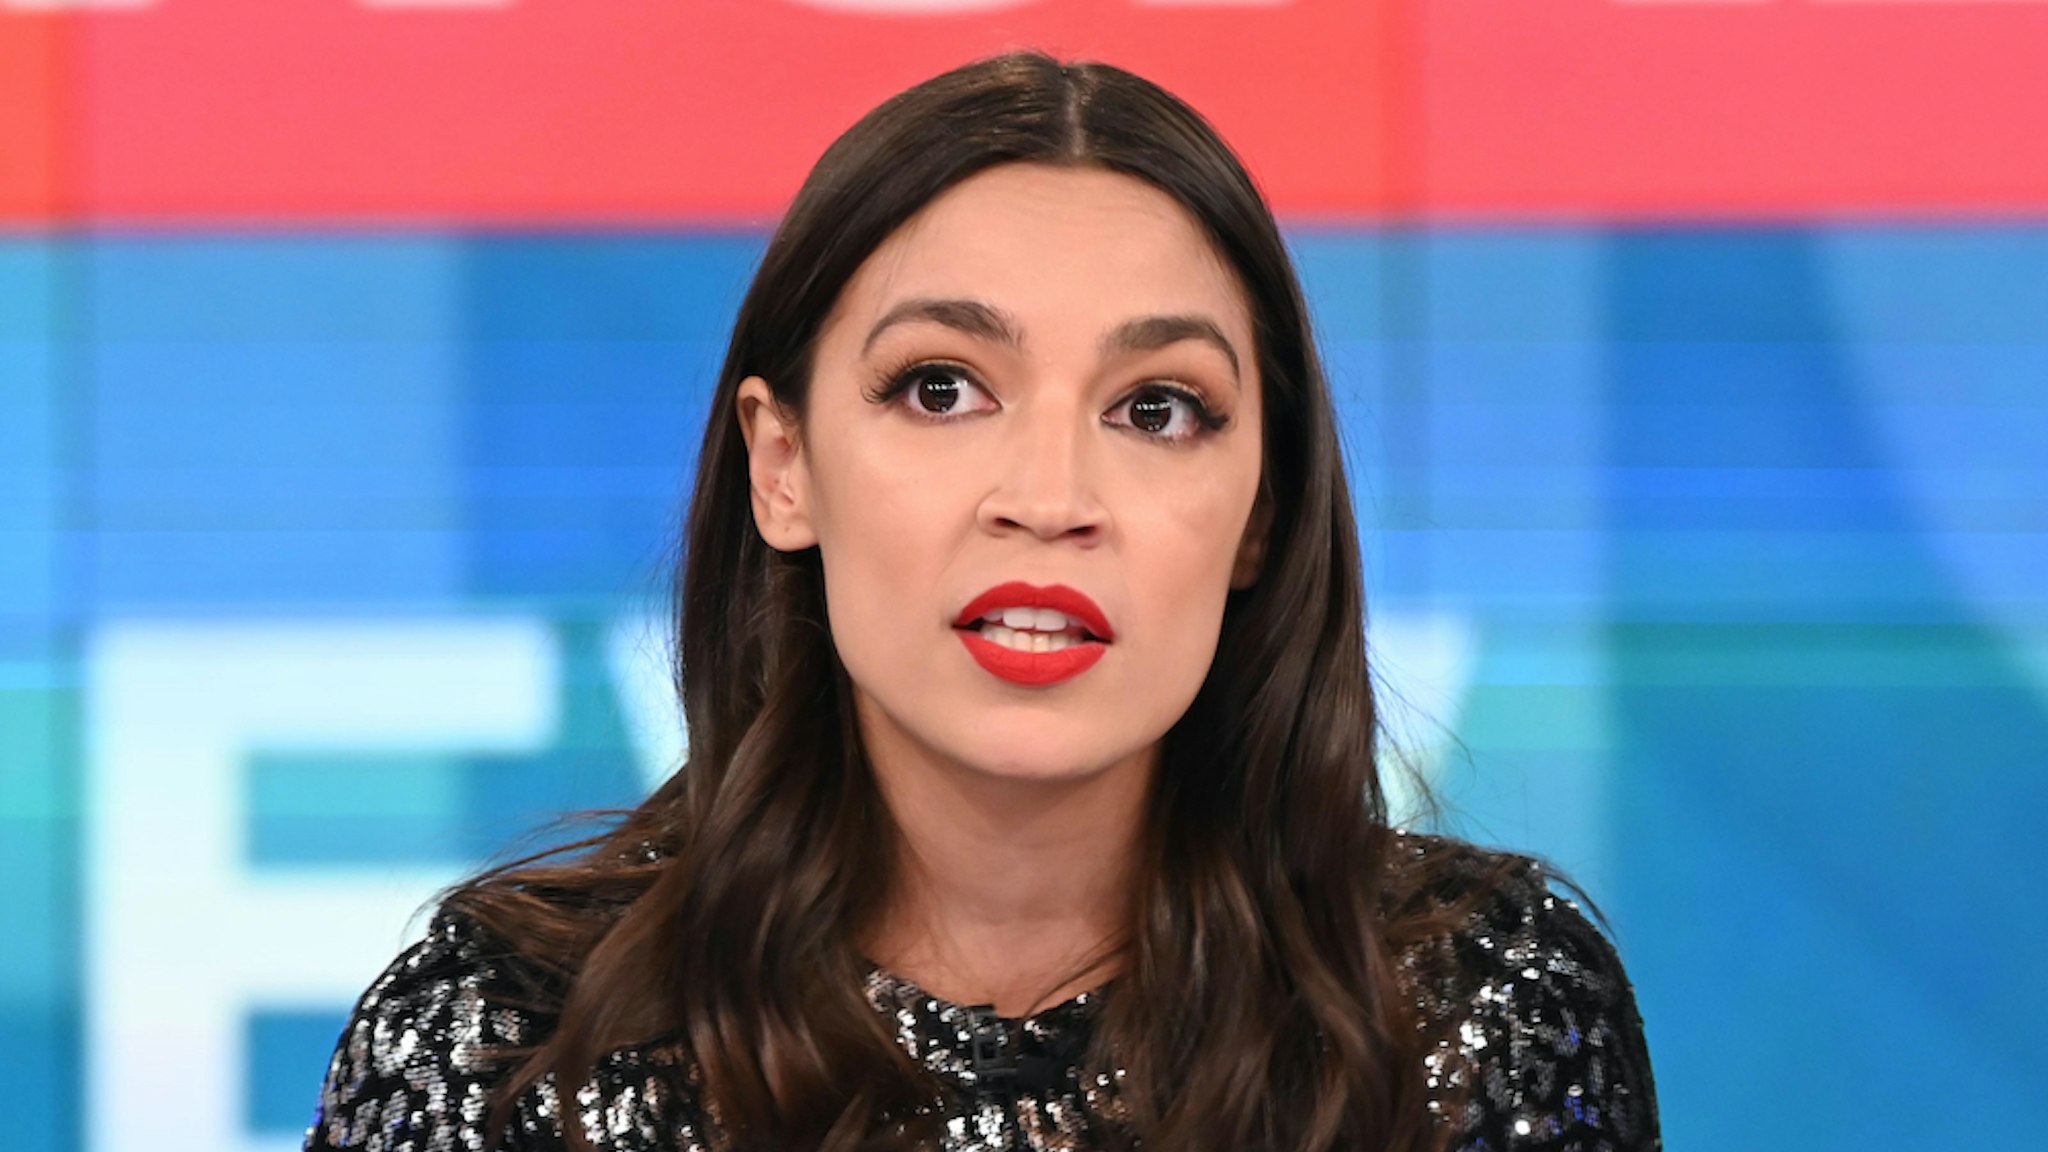 Alexandria Ocasio-Cortez is the guest today, Wednesday, February 19, 2020 on ABC's "The View." "The View" airs Monday-Friday, 11am-12pm, ET on ABC. (Photo by Jenny Anderson/ABC via Getty Images)